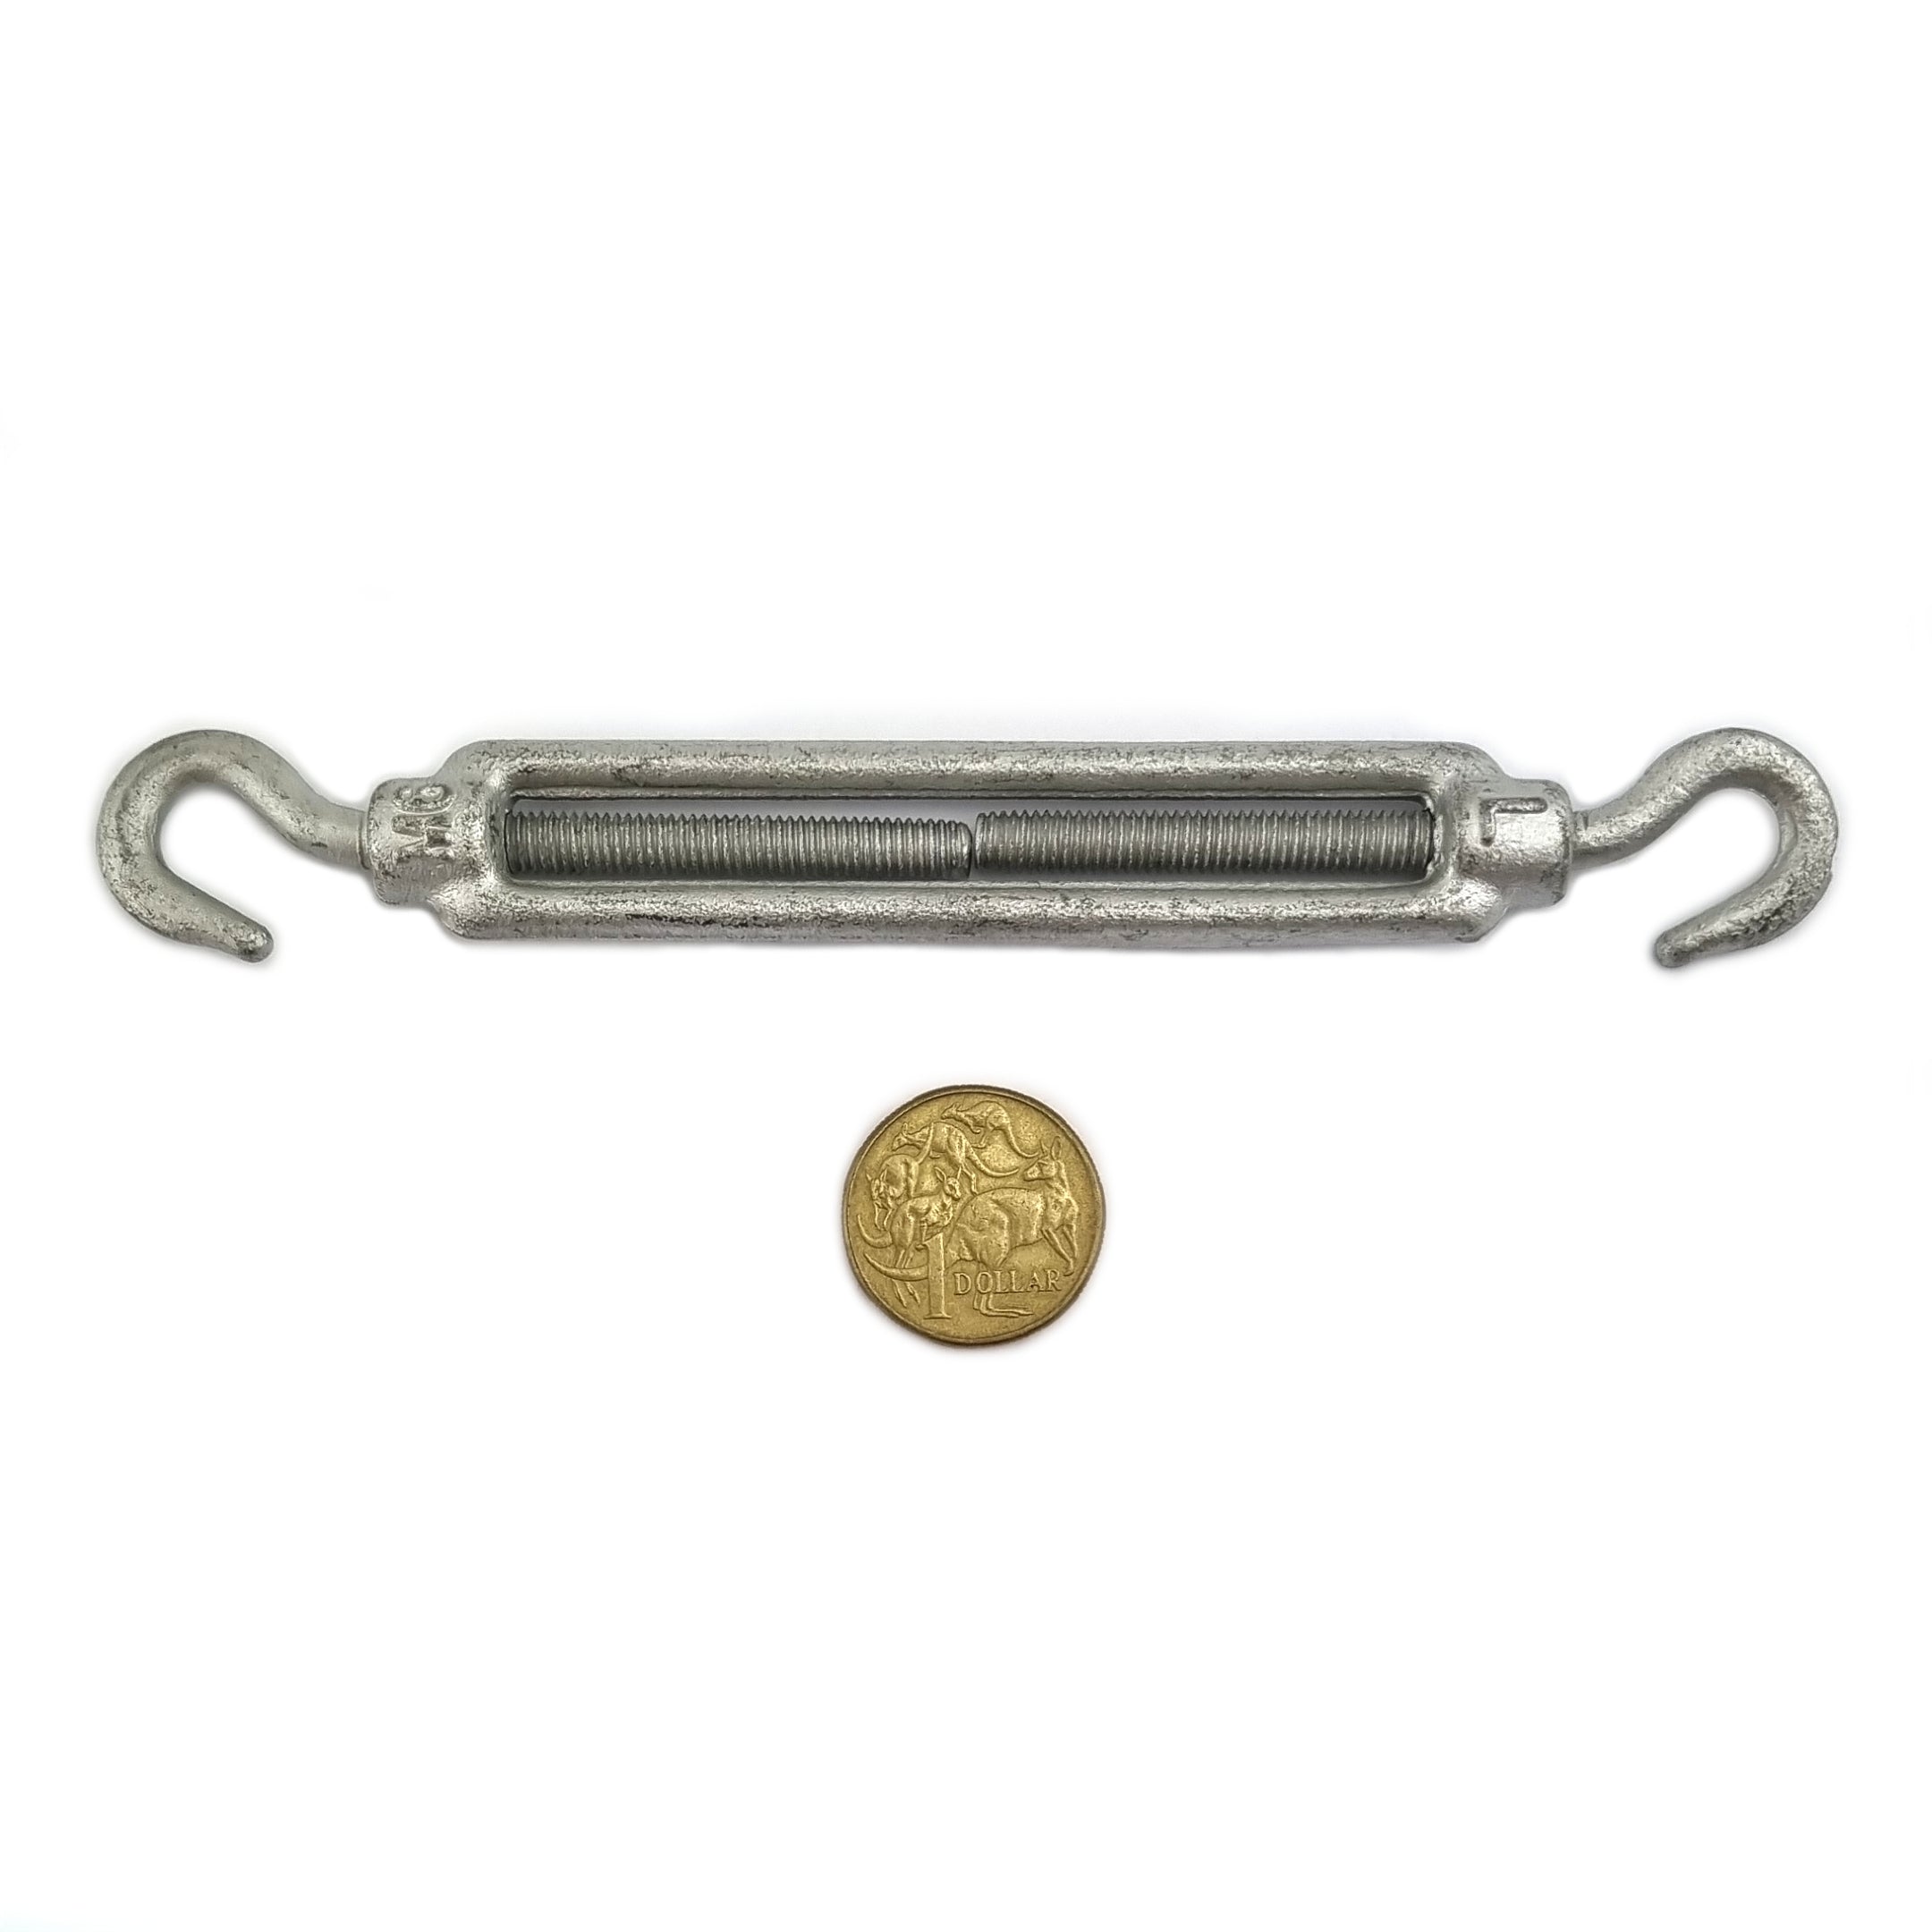 6mm Hook-hook turnbuckle in a galvanised finish. Shop hardware online chain.com.au